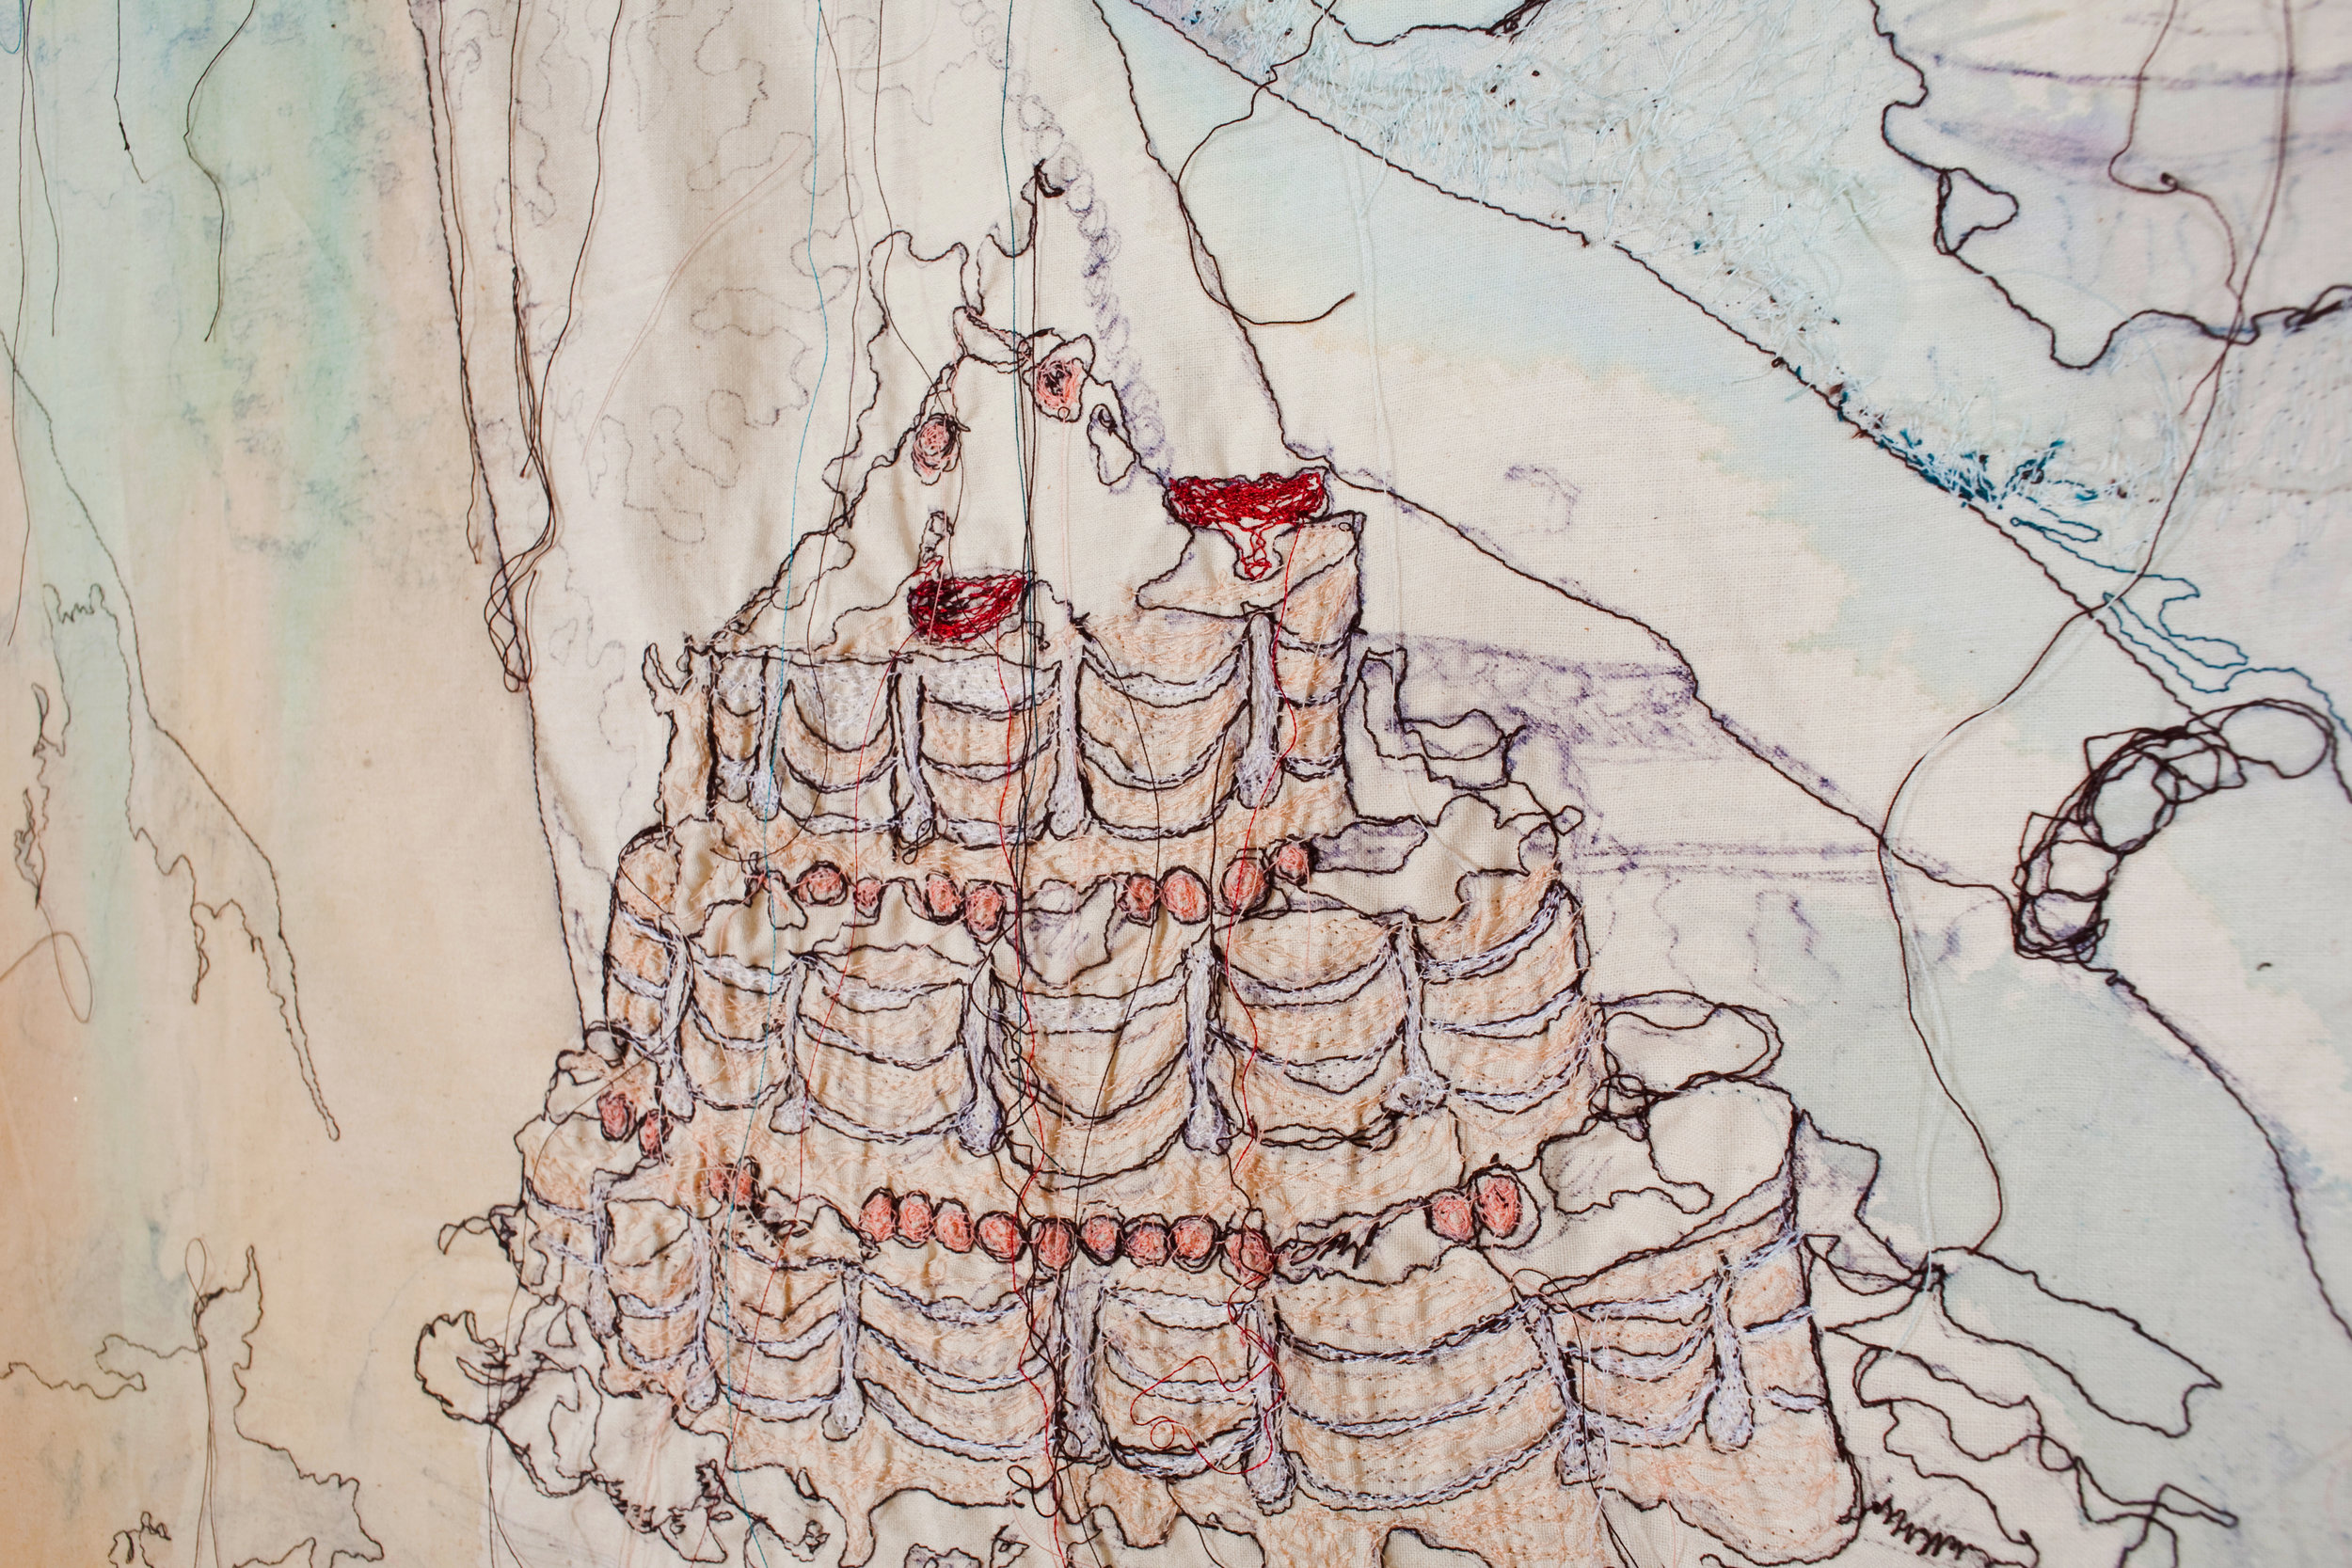   Let Them Eat Cake! (Detail)   Sewing/ Embroidery with Watercolor and India Ink on Muslin  2009  Photo:  Daniel Shea  